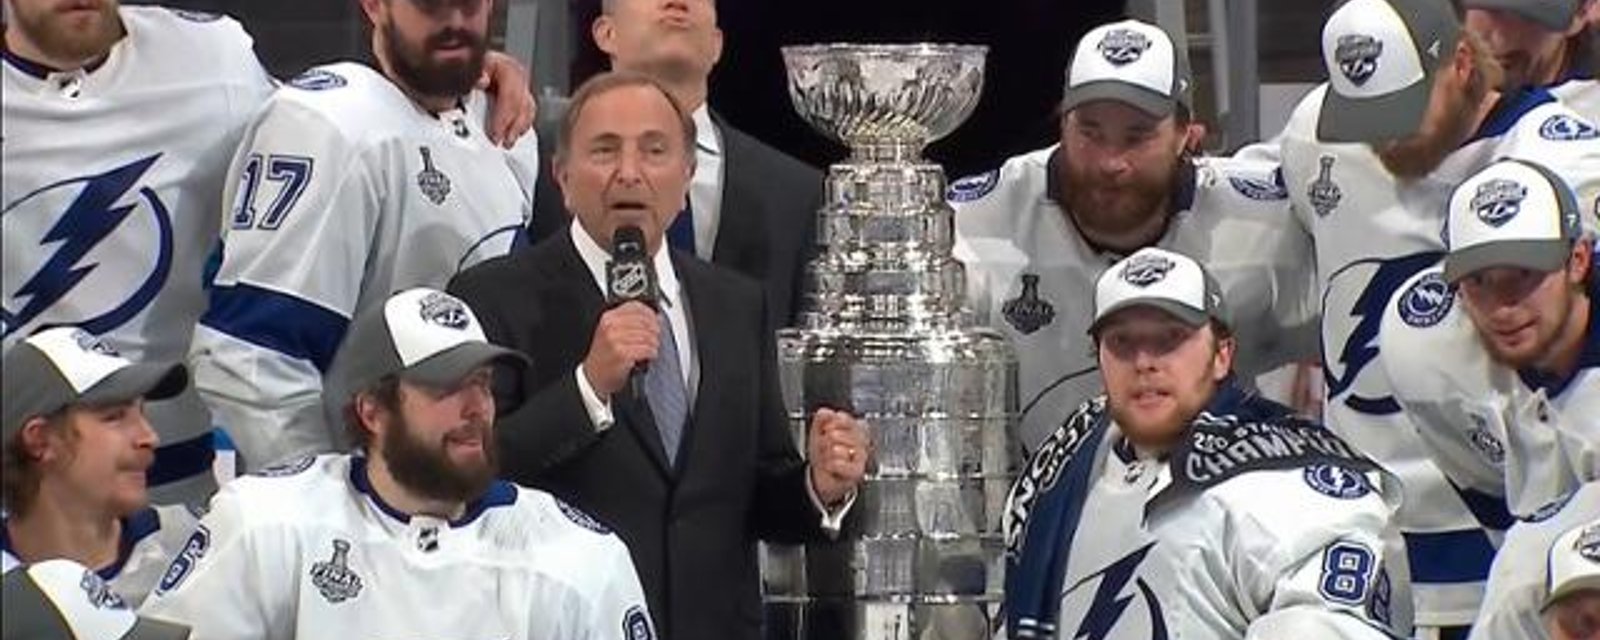 Don’t worry: Bettman was booed at the Stanley Cup final! 